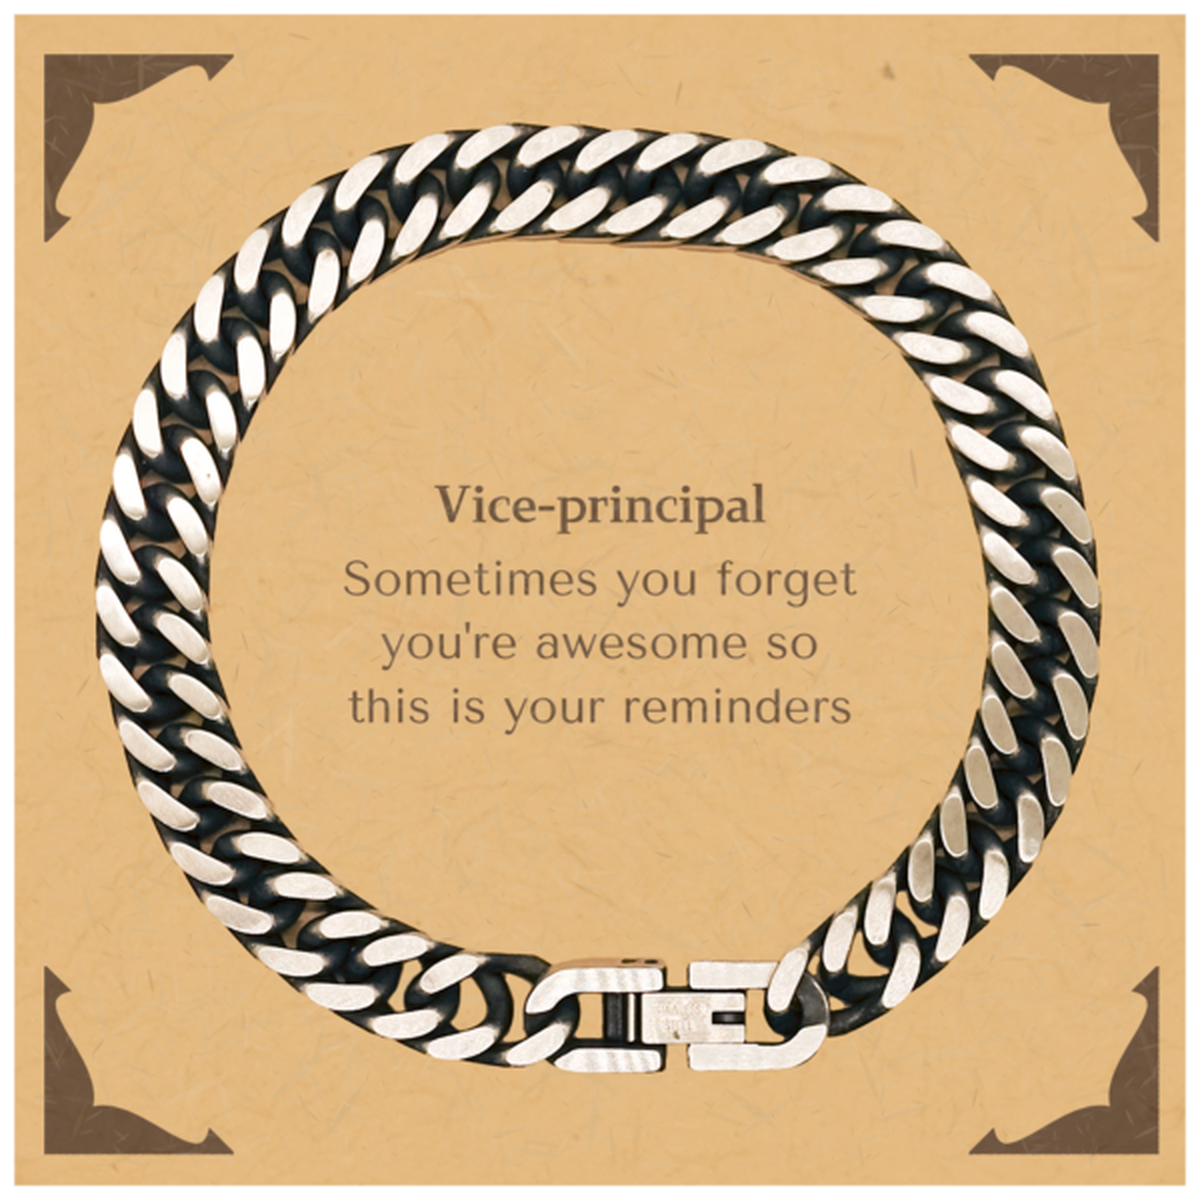 Sentimental Vice-principal Cuban Link Chain Bracelet, Vice-principal Sometimes you forget you're awesome so this is your reminders, Graduation Christmas Birthday Gifts for Vice-principal, Men, Women, Coworkers